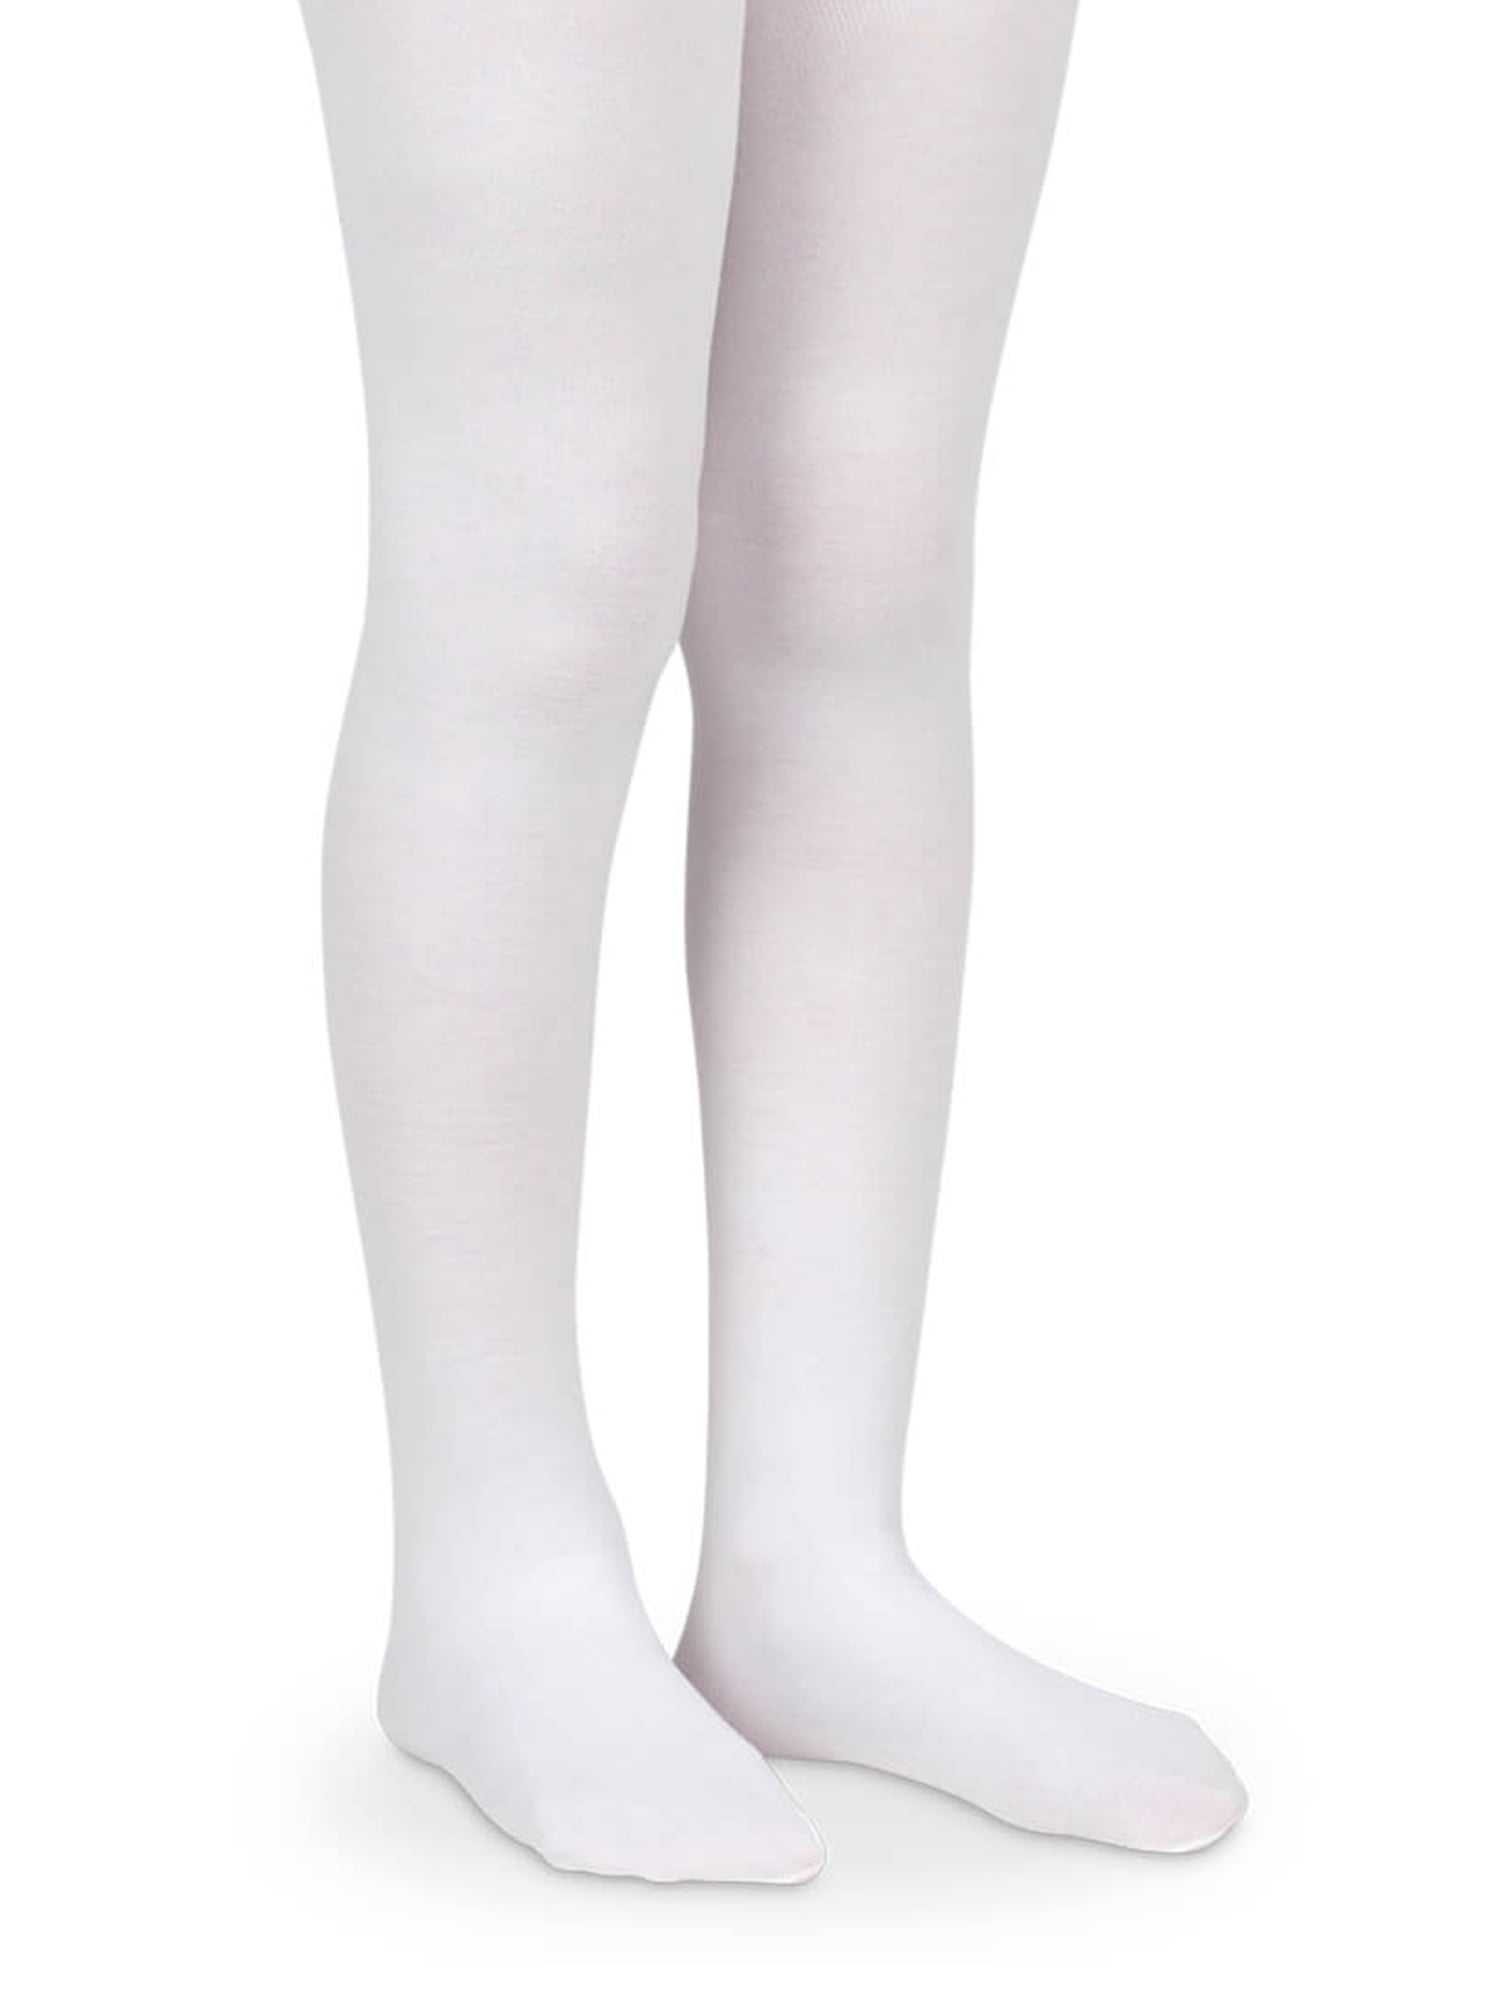 6-8 Years Old 5x PAIRS Premium Cotton School Tights Girls Winter Tights for 4-6 